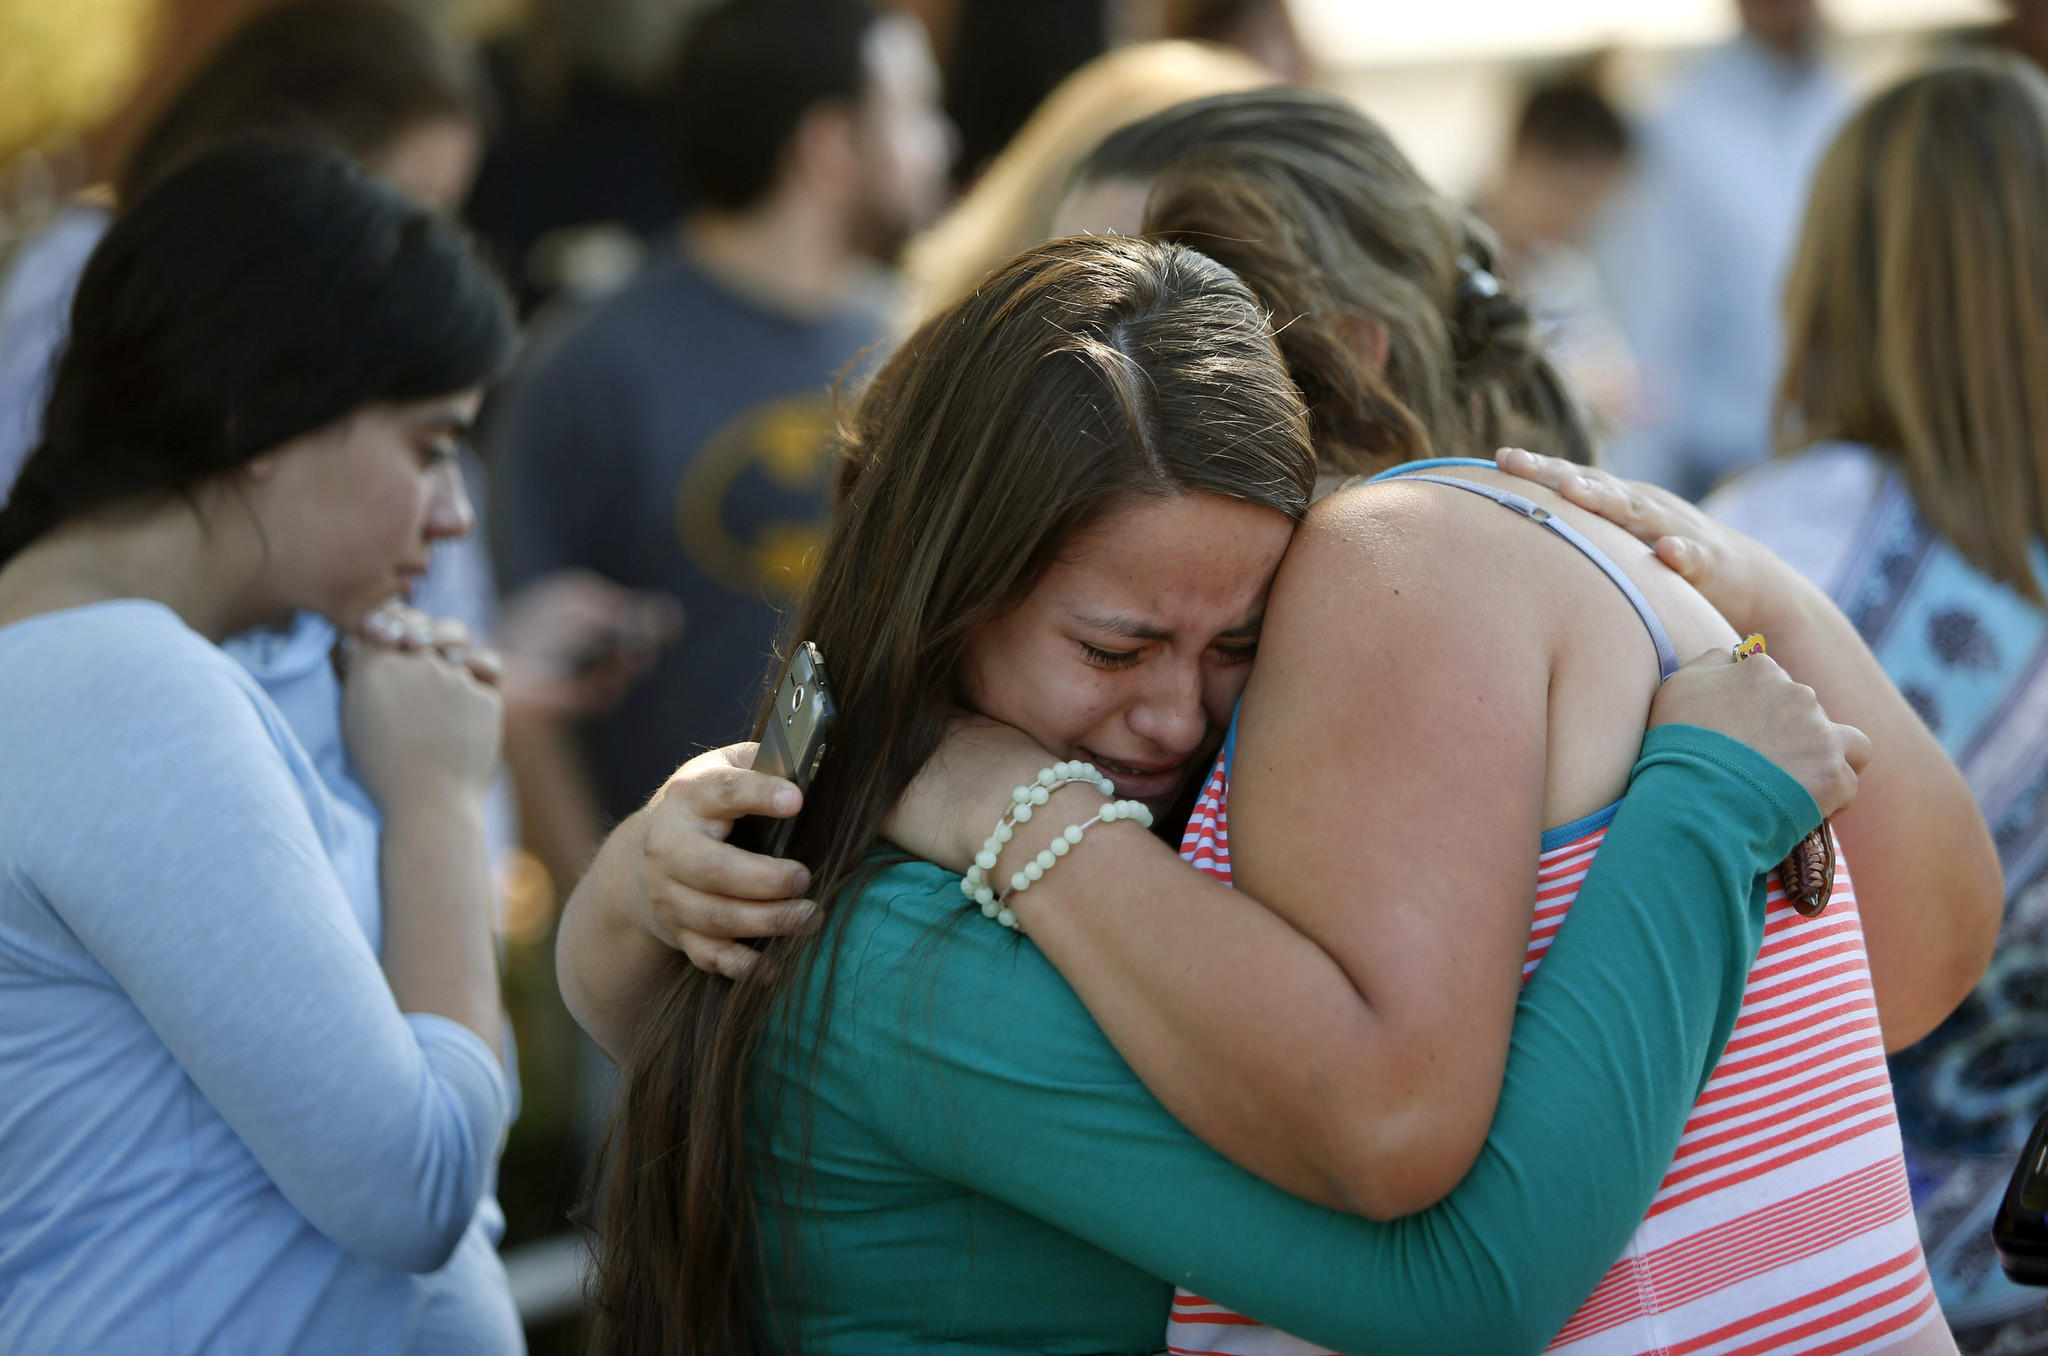 Oregon Gunman Was Kicked Out Of Army Studied Mass Shooters Chicago